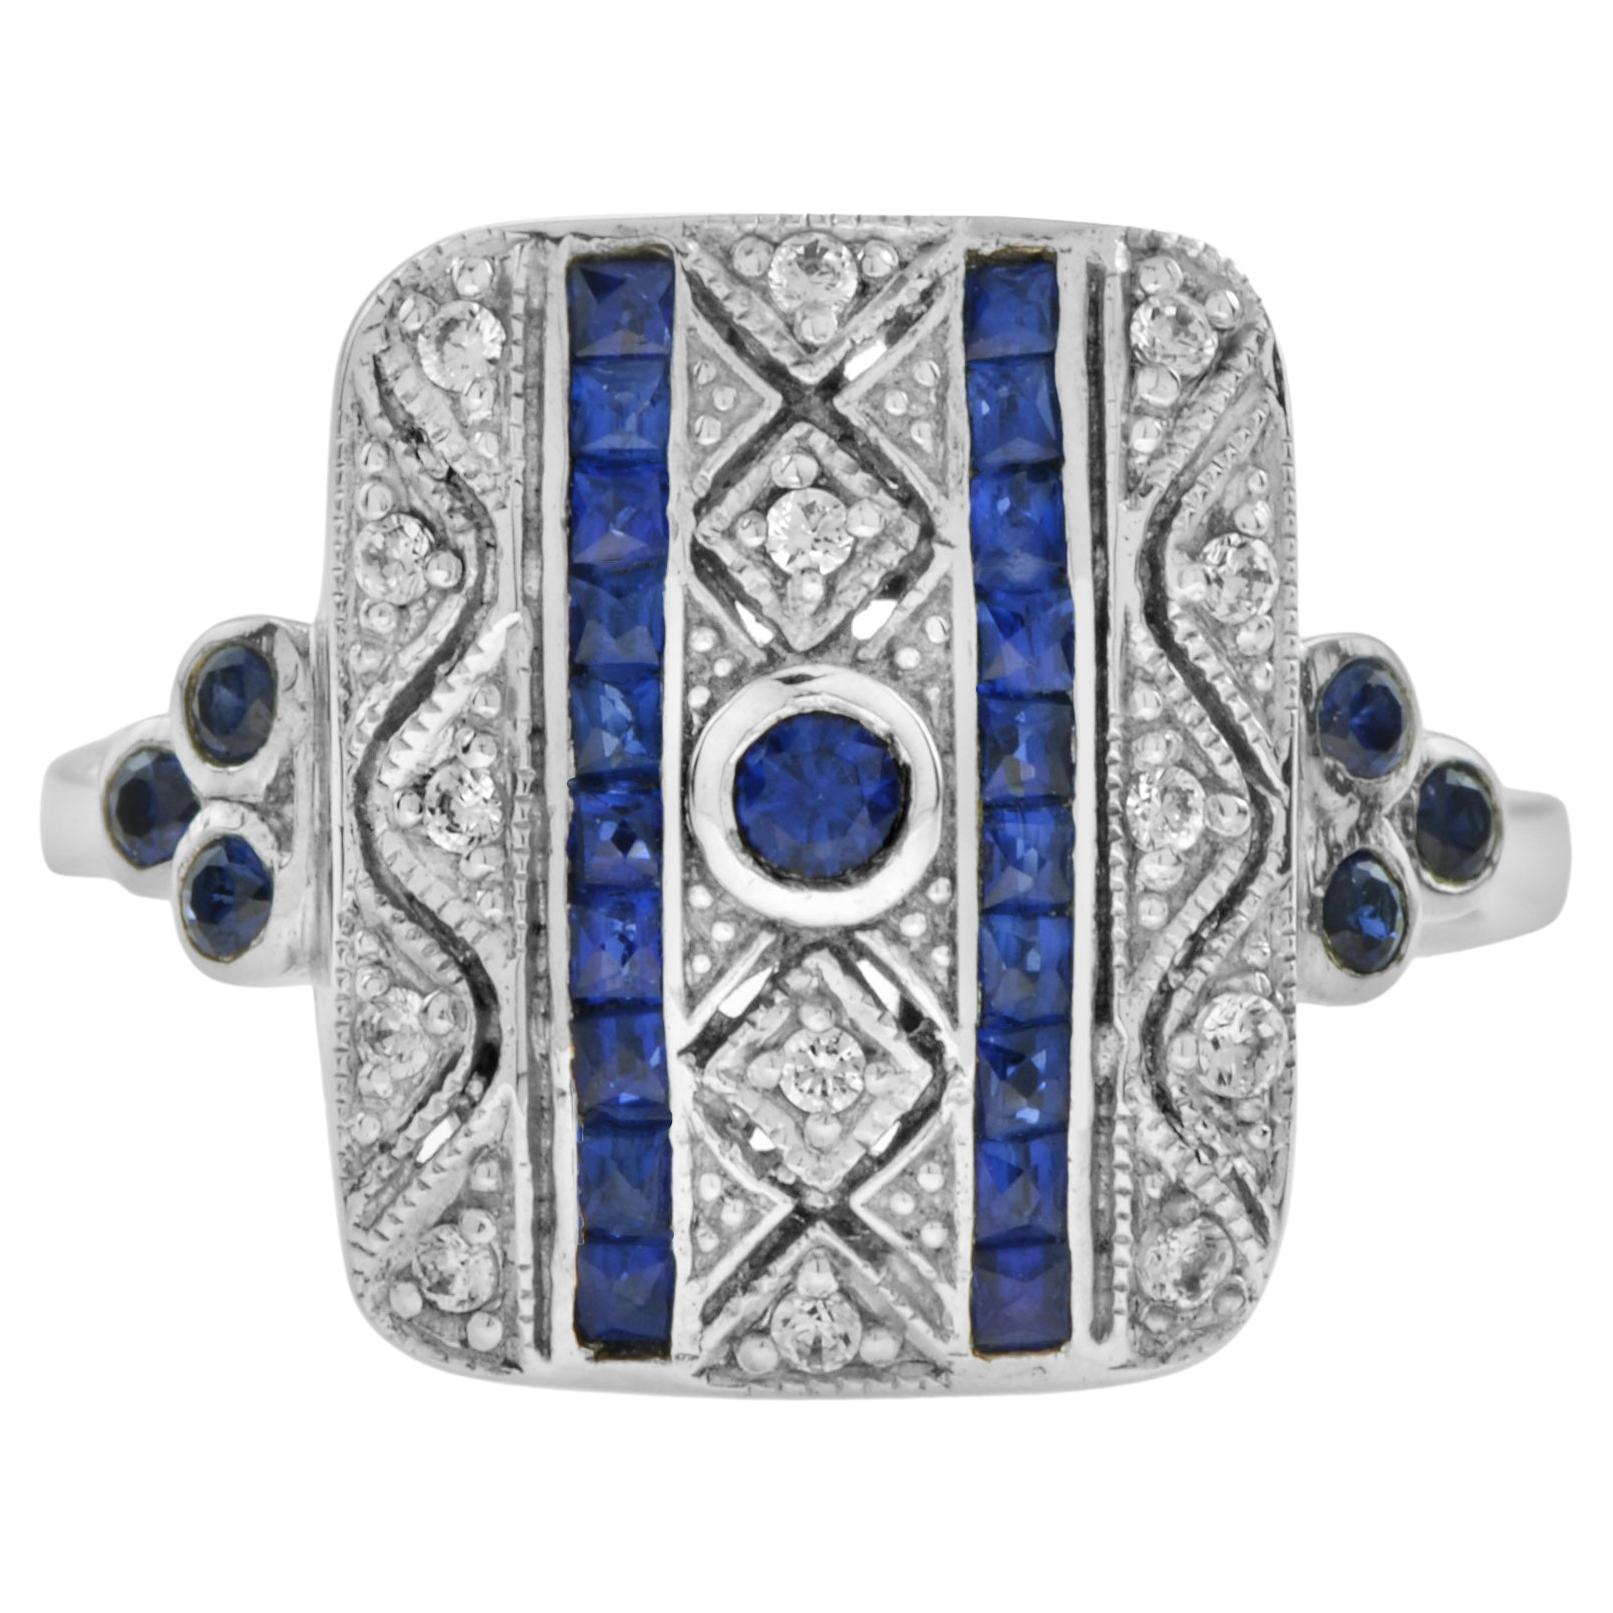 Art Deco Style Sapphire and Diamond Square Ring in 14K White Gold